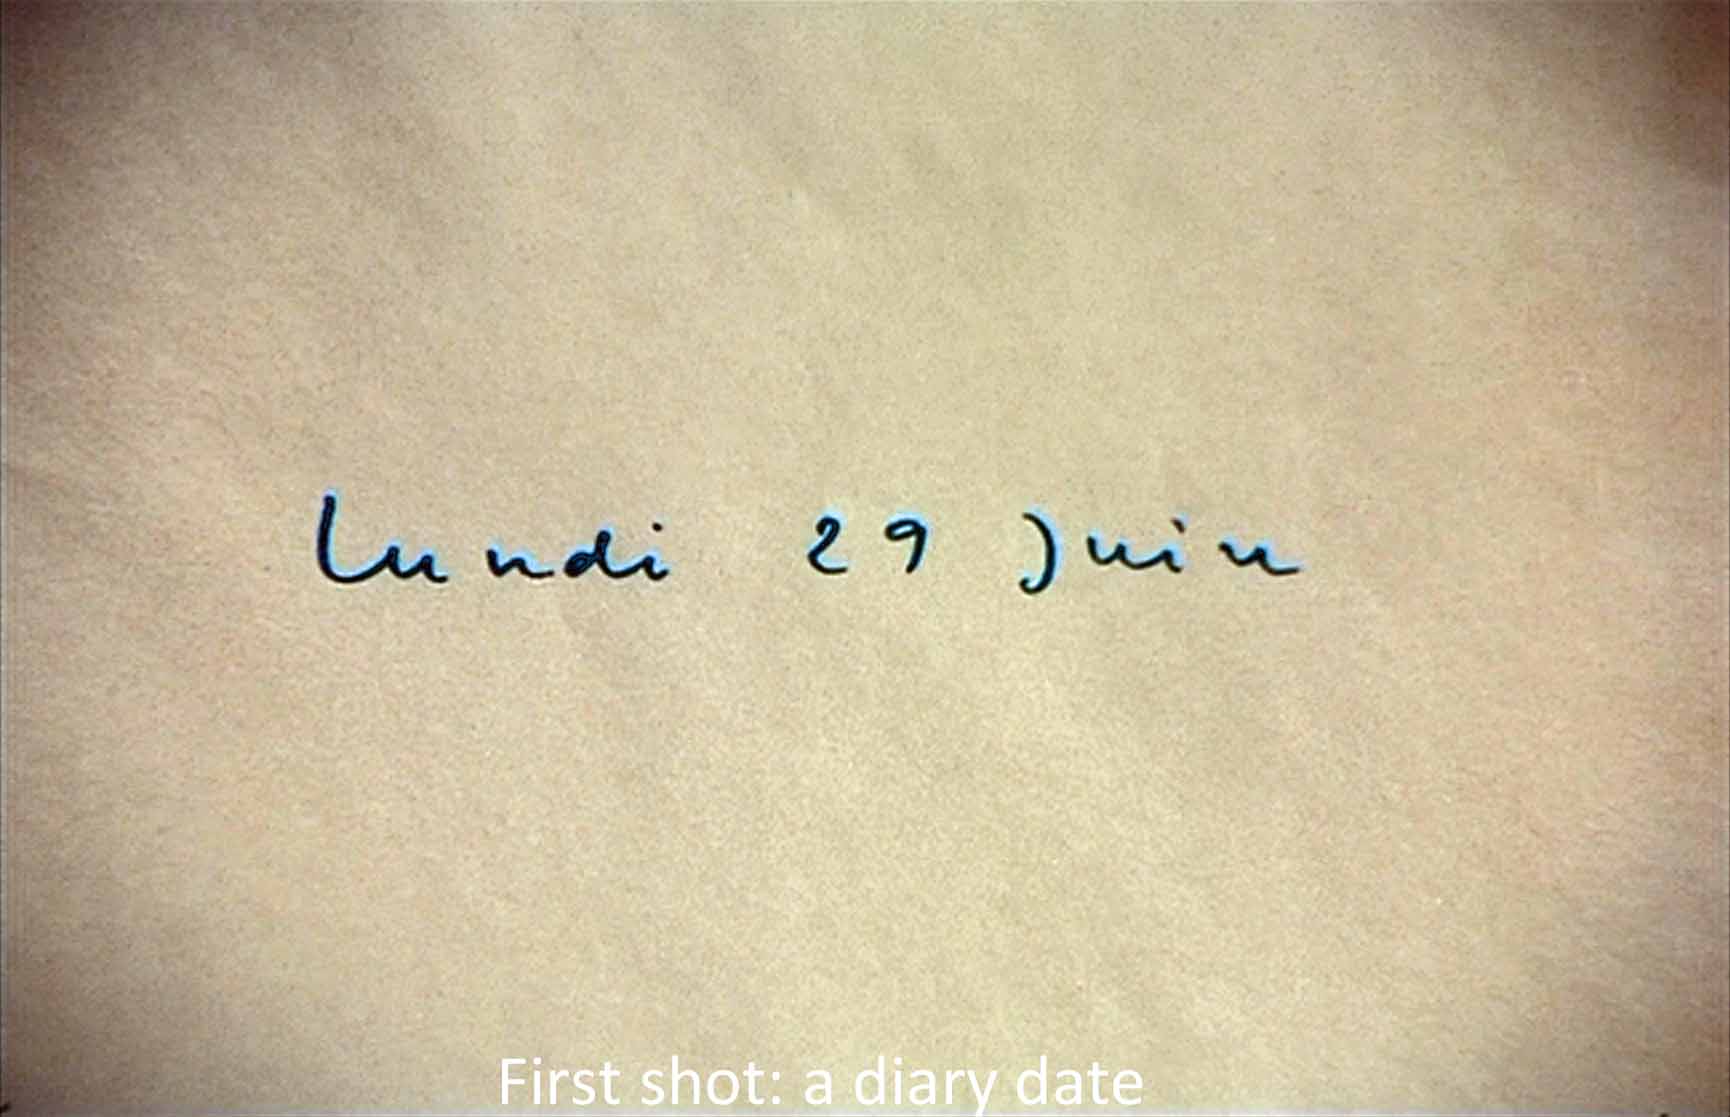 First shot: a diary date